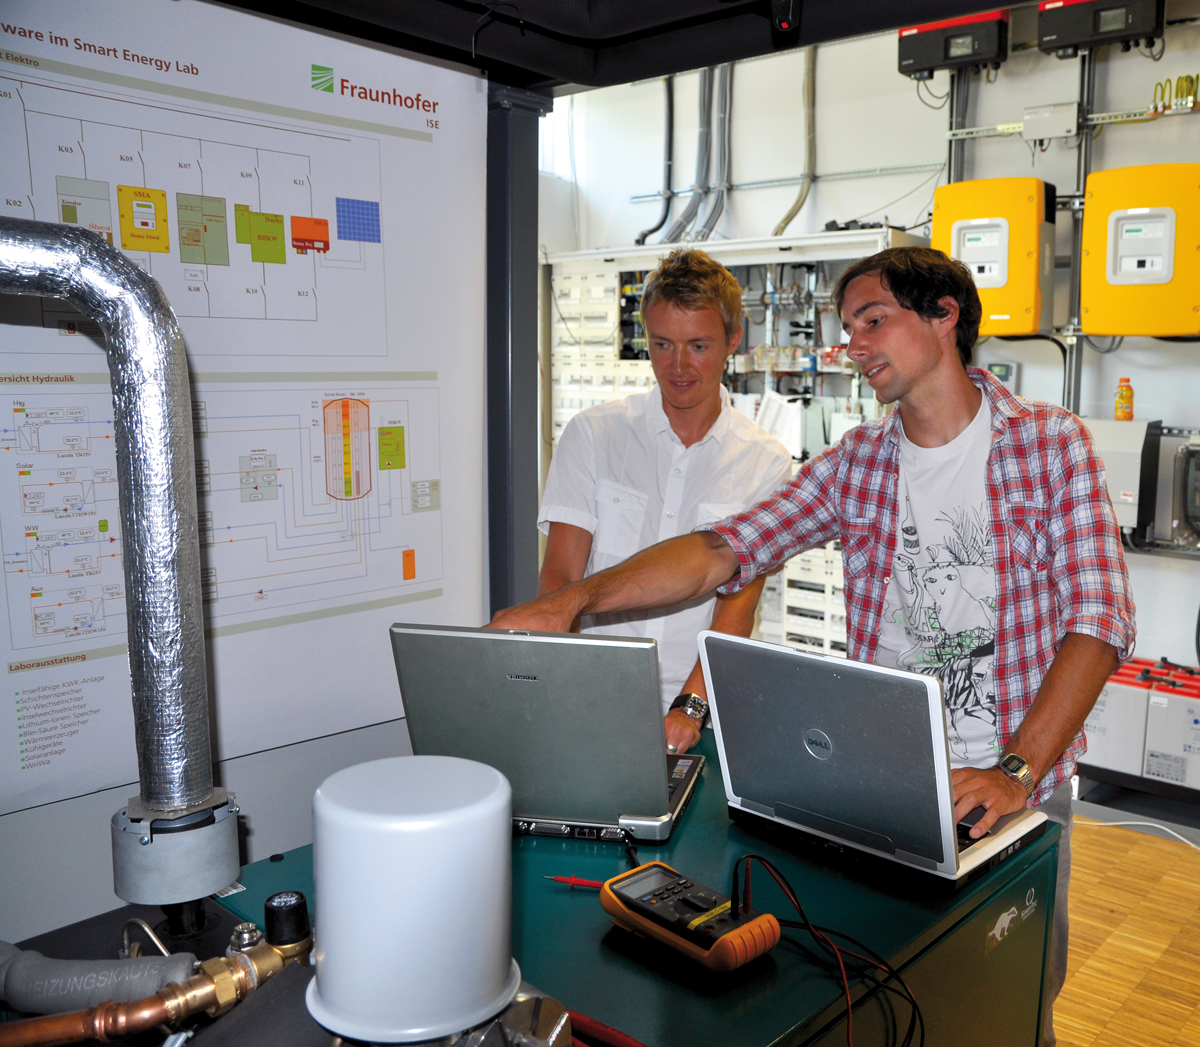 Newly developed concepts are implemented and tested in the SmartEnergyLab of Fraunhofer ISE.